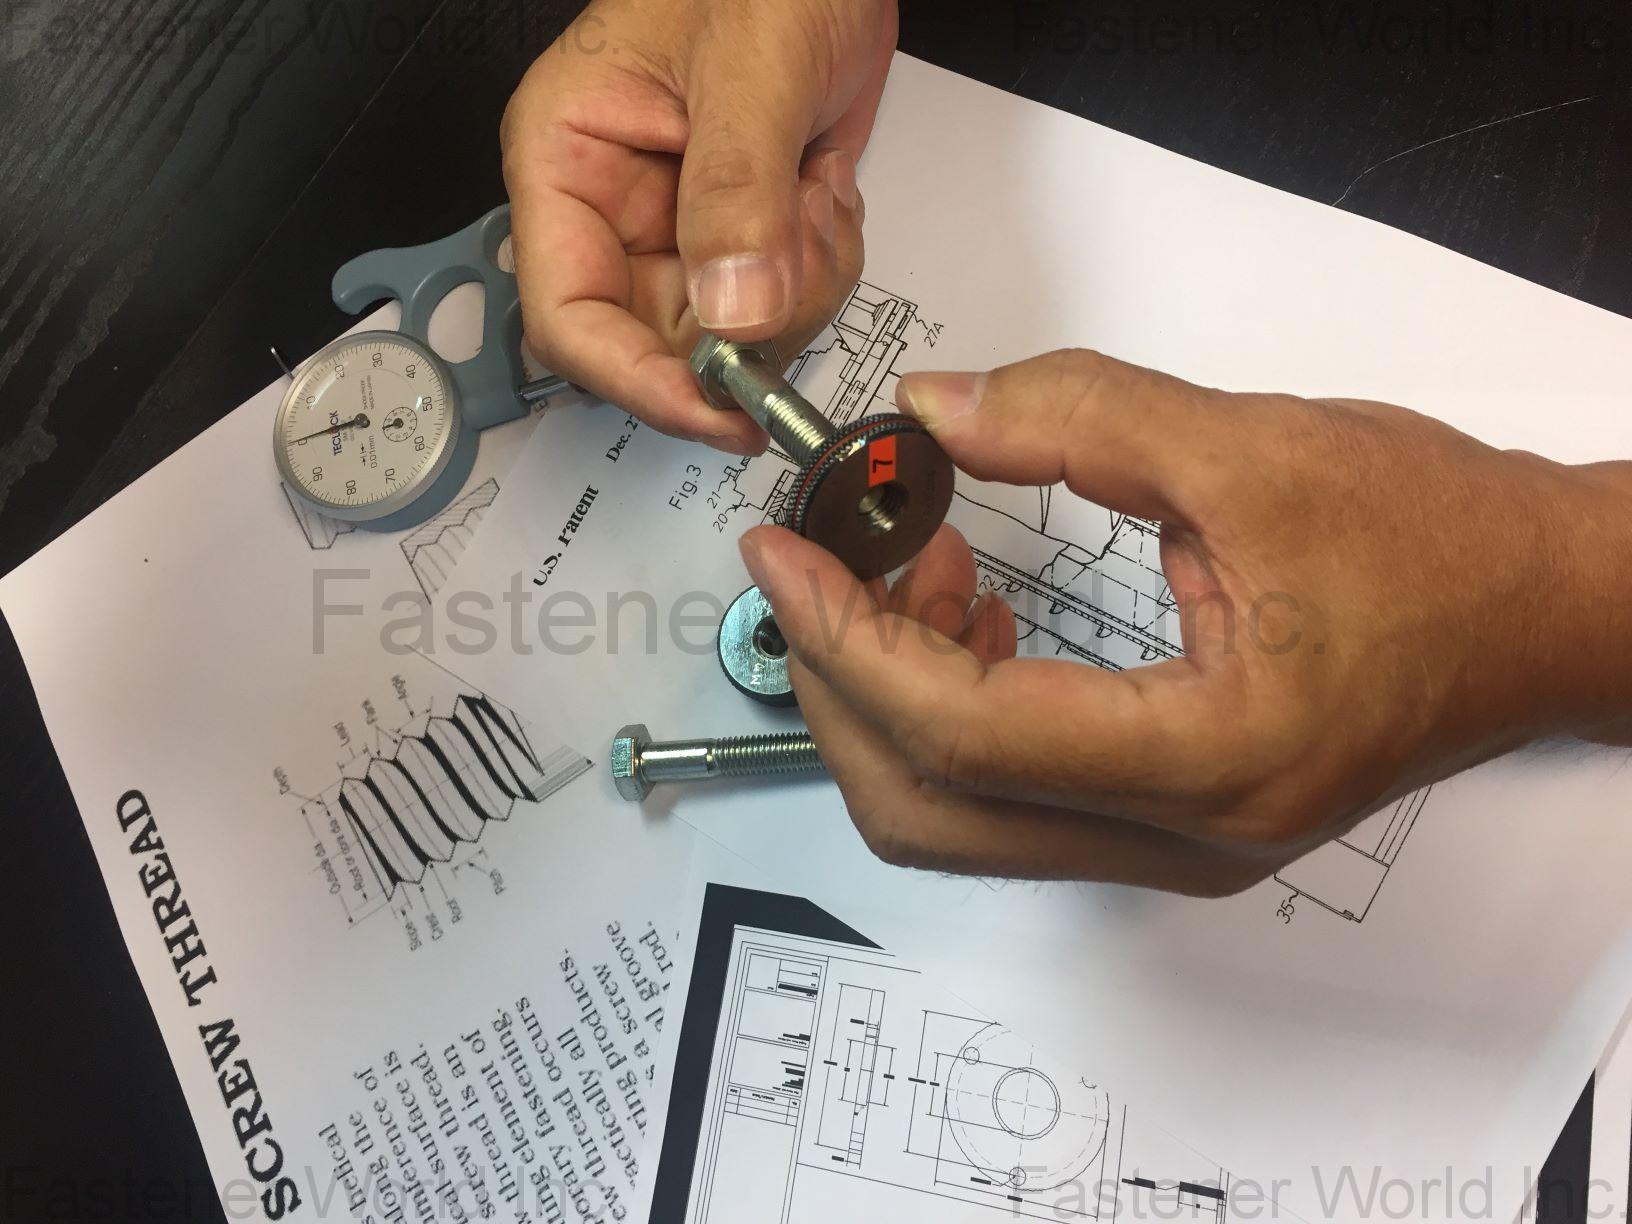 Asia Technical Services , Inspection, Torque calibration, Fastener inspection, Sensor Calibration, Torque sensor, Representation, Quality Inspection Services in TAIWAN, ISO 17025 Length & Torque Calibration Lab